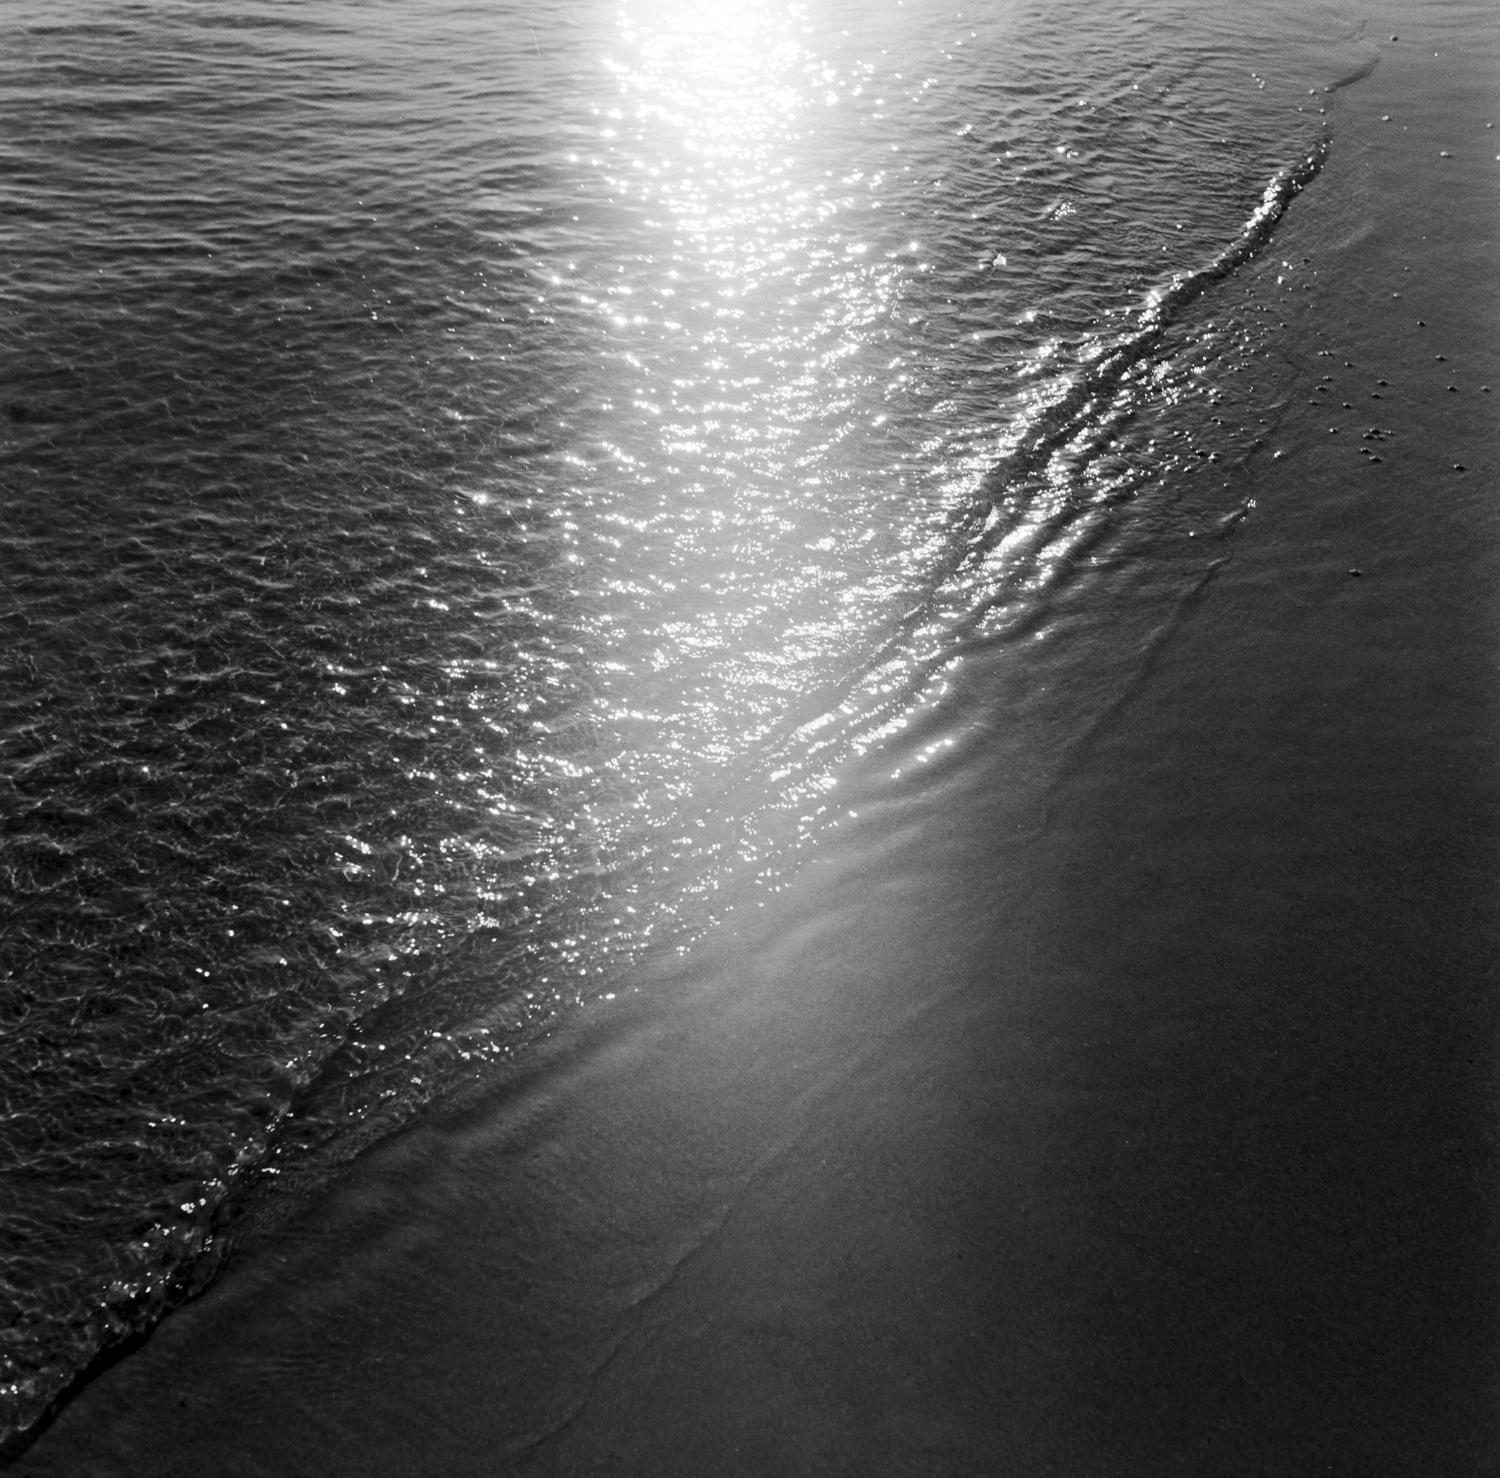 Black and white photograph depicting the shore line of a beach in dappled sunlight.